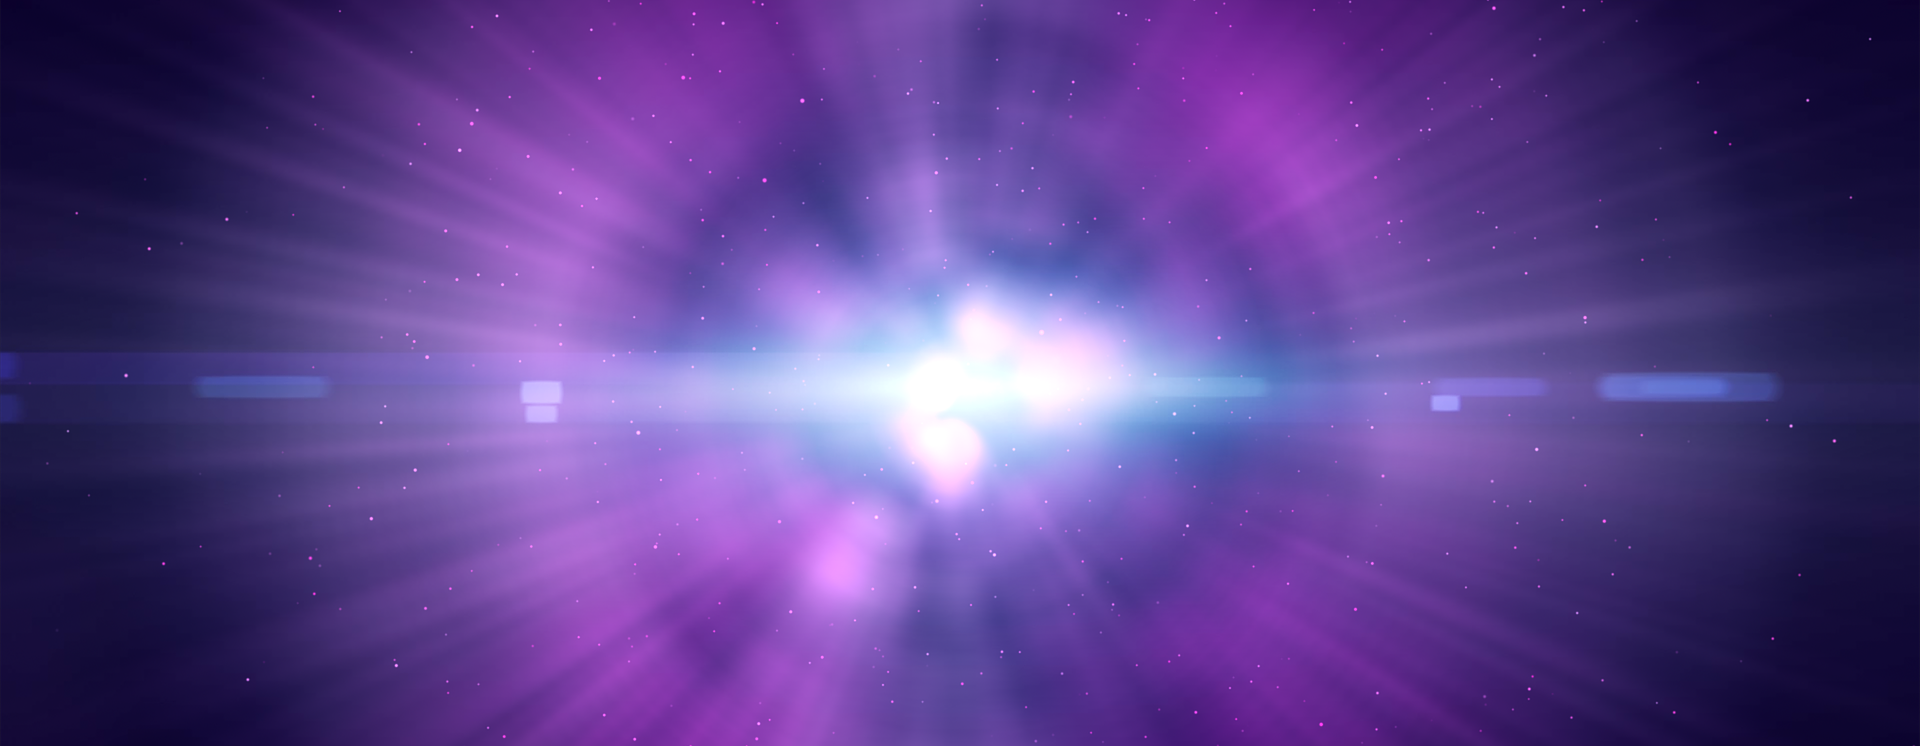 Abstract picture of light against a purple background